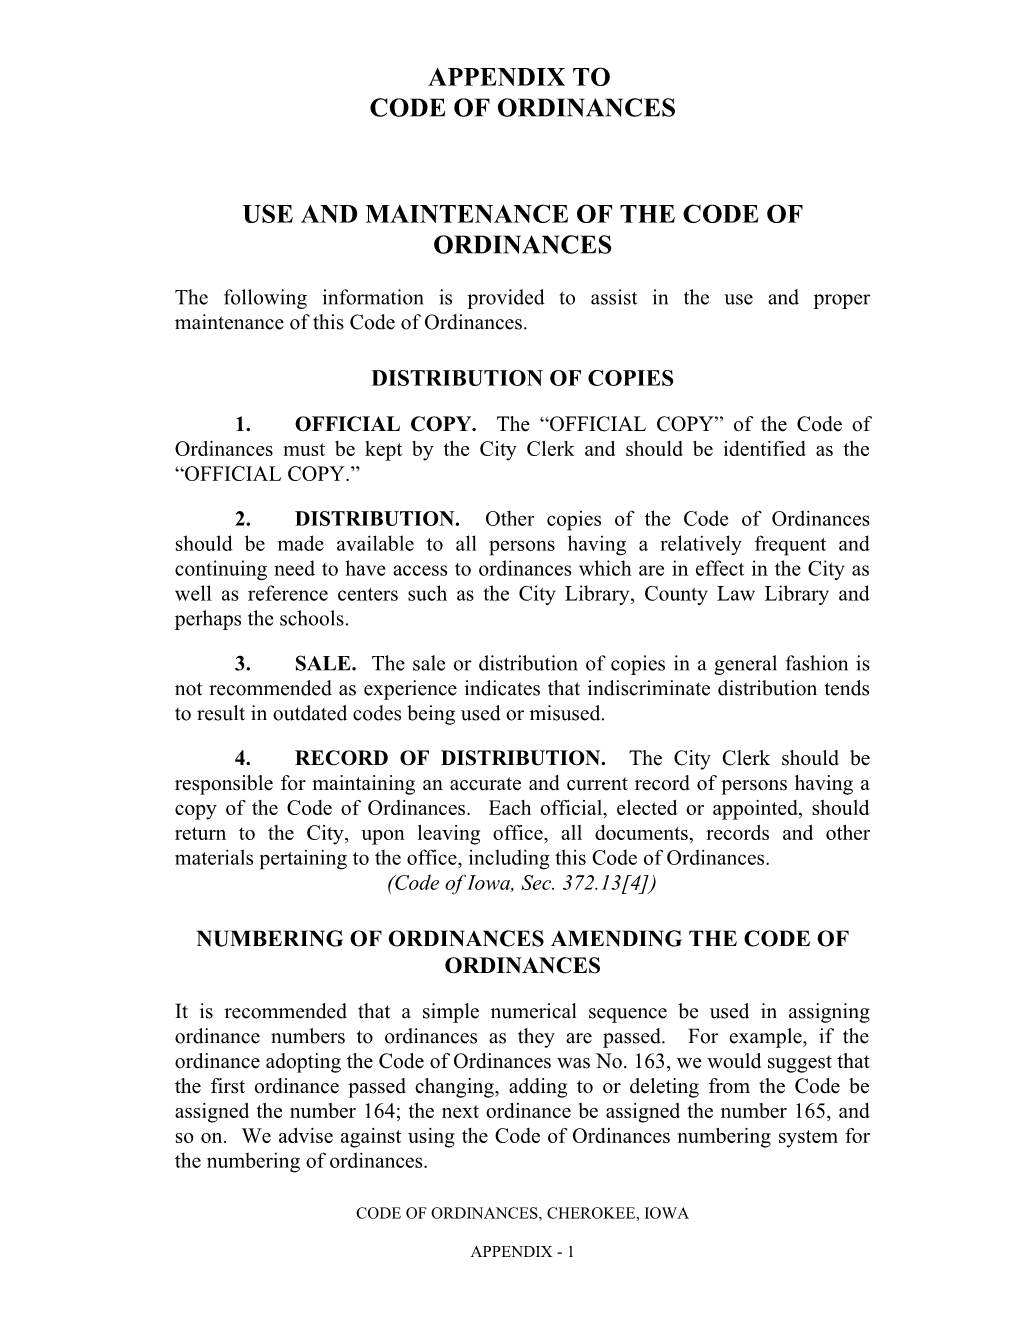 Use and Maintenance of the Code of Ordinances